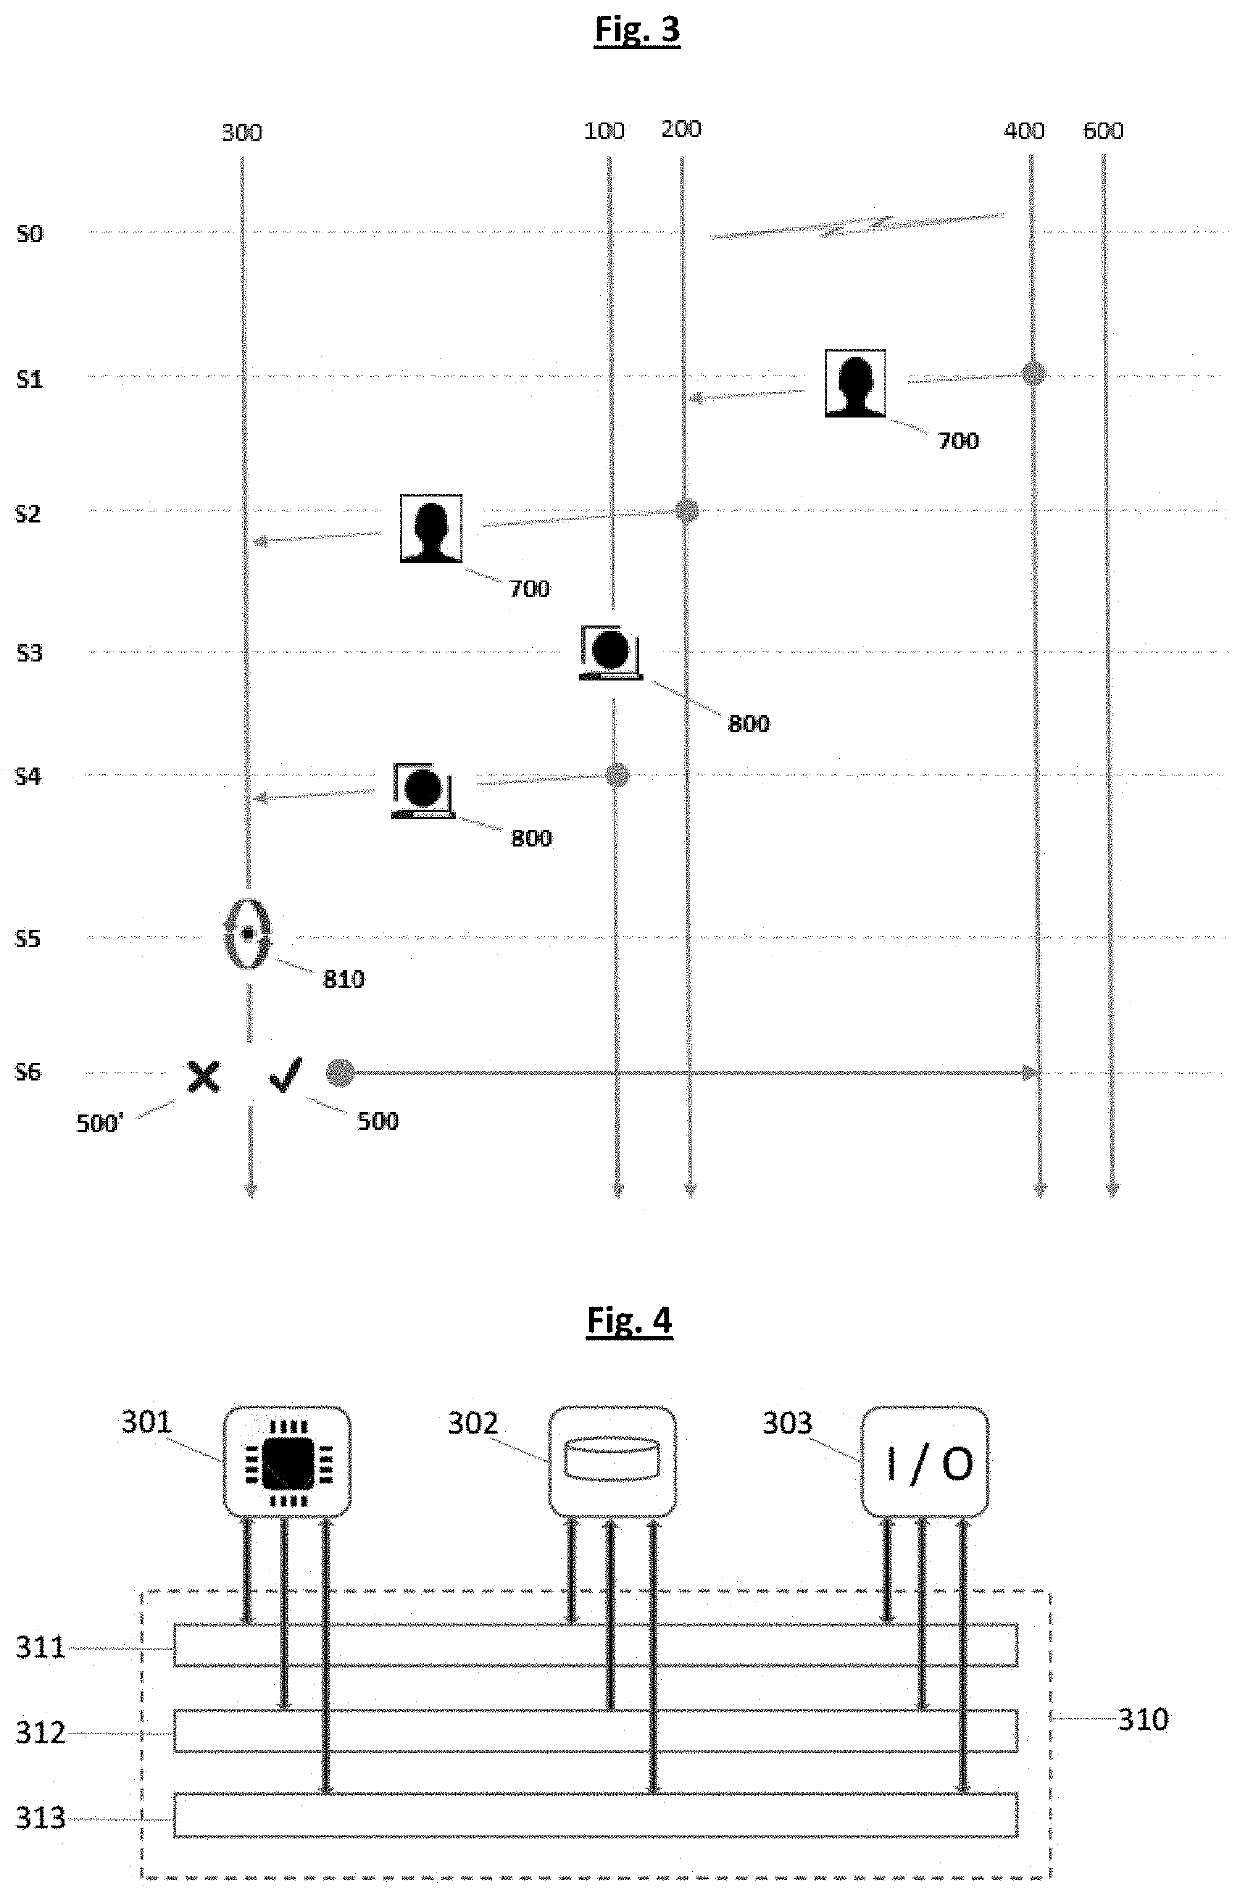 Personal identity verification system and method for verifying the identity of an individual